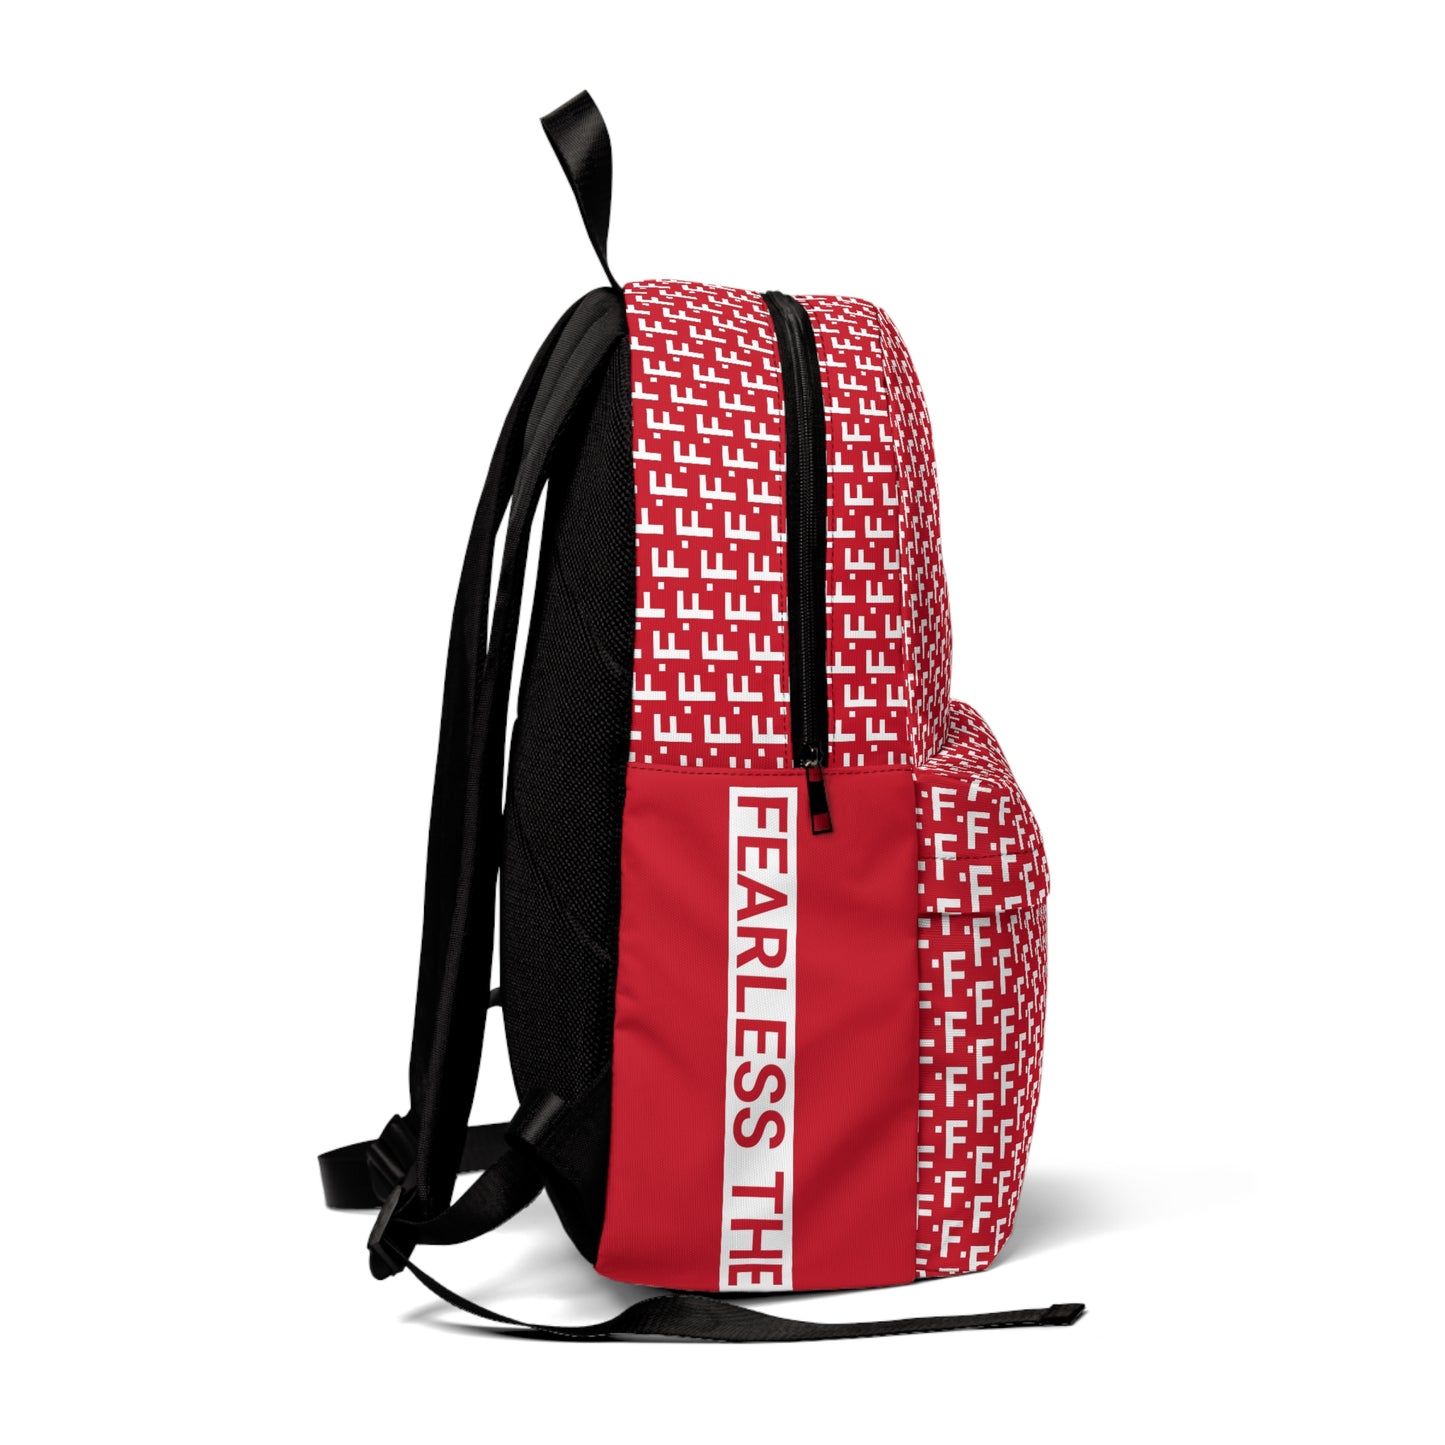 F. PATTERN BACKPACK